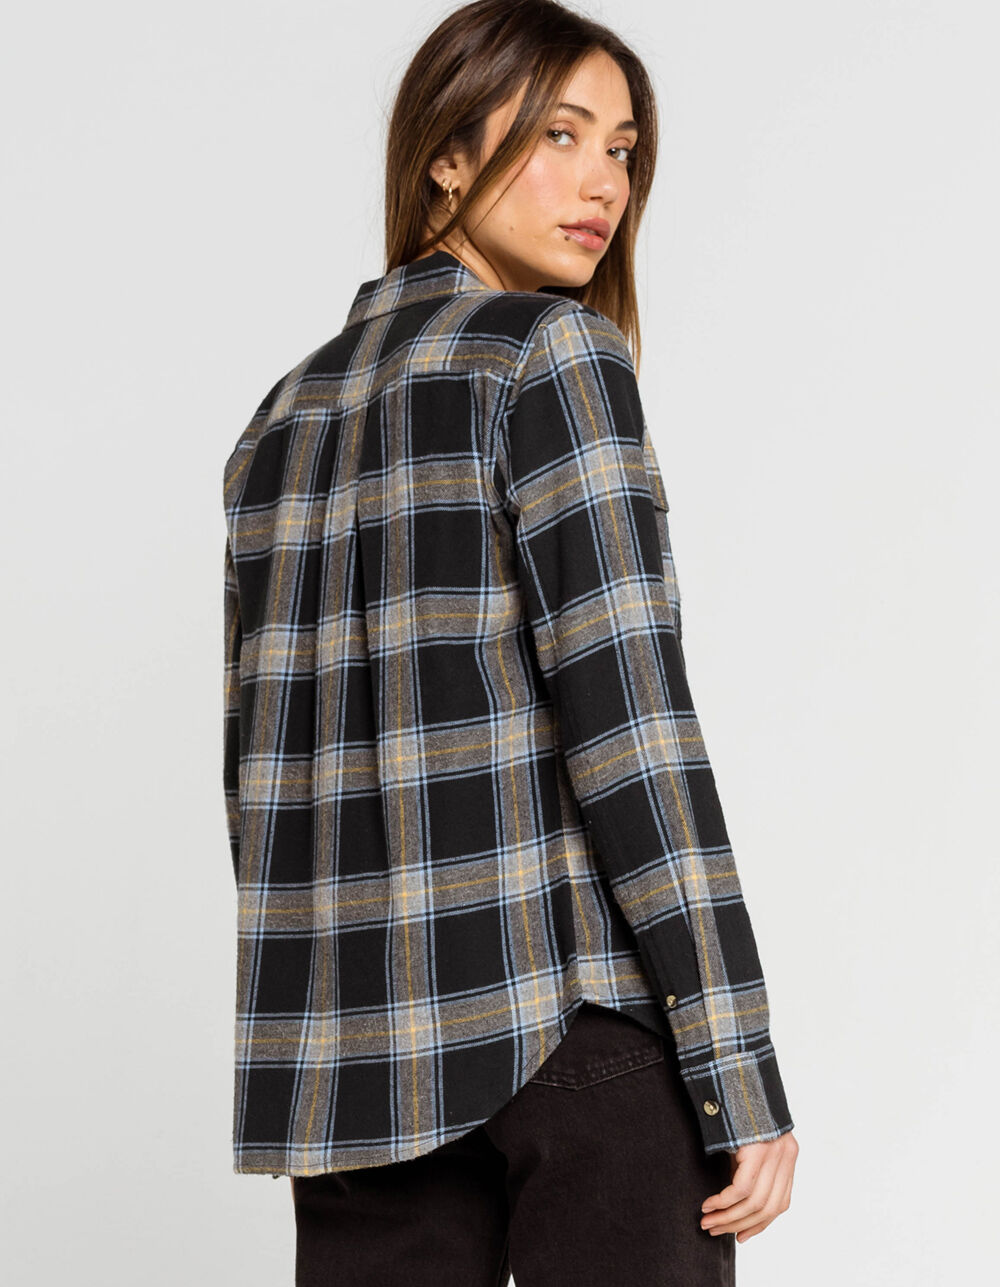 BRIXTON Bowery Womens Navy Flannel Shirt - NAVY COMBO | Tillys